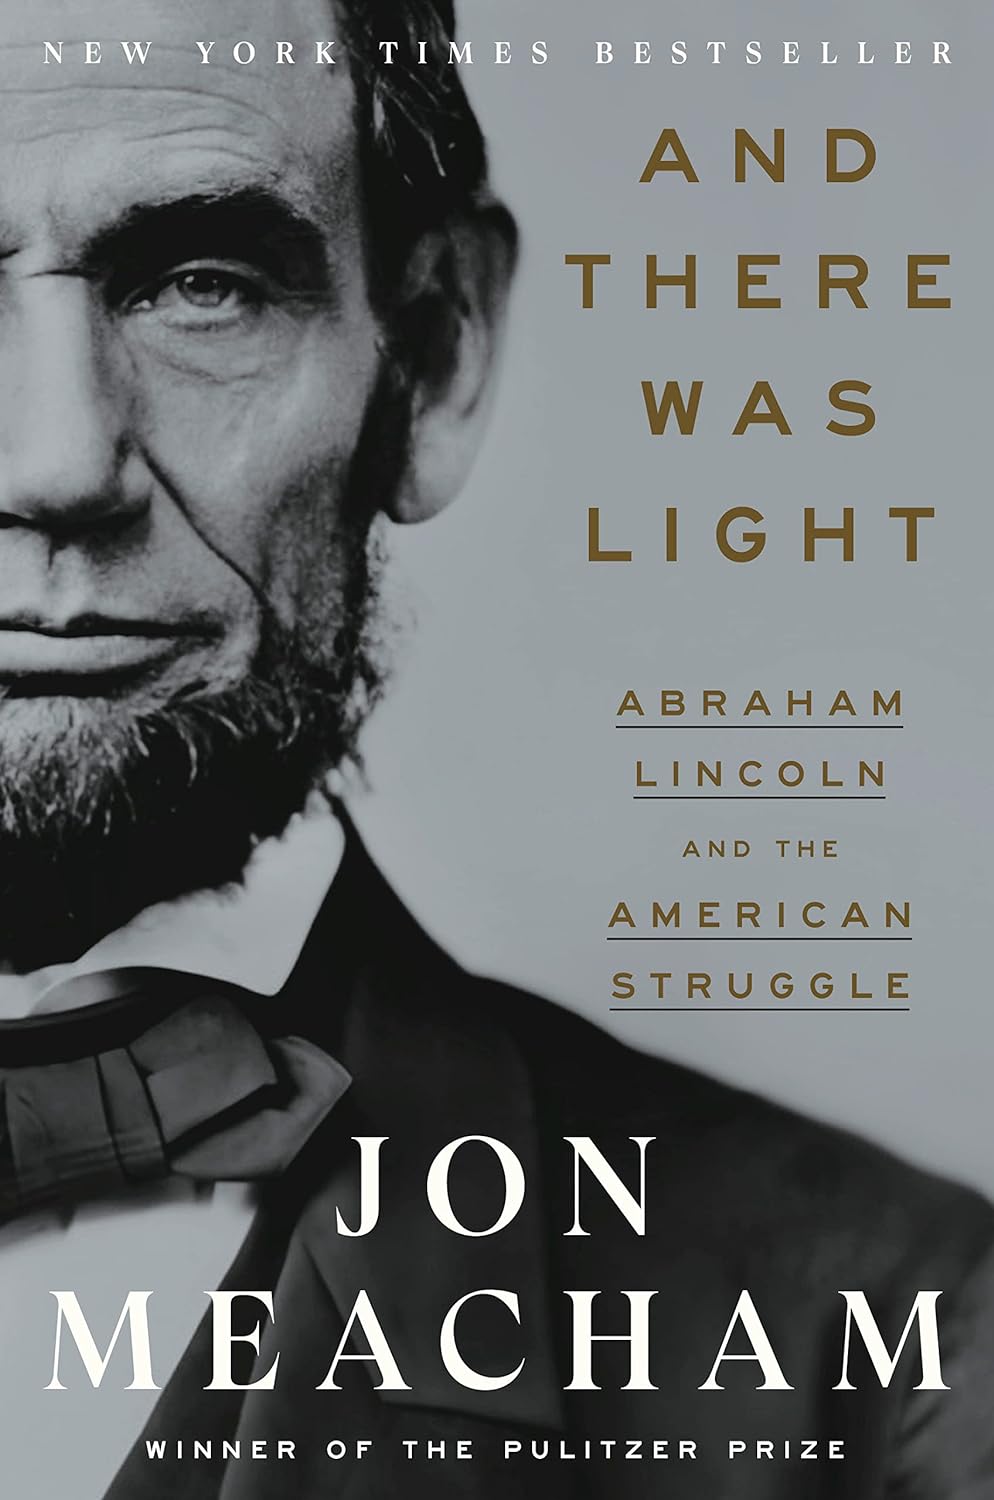 Image for "And There Was Light: Abraham Lincoln and the American Struggle"